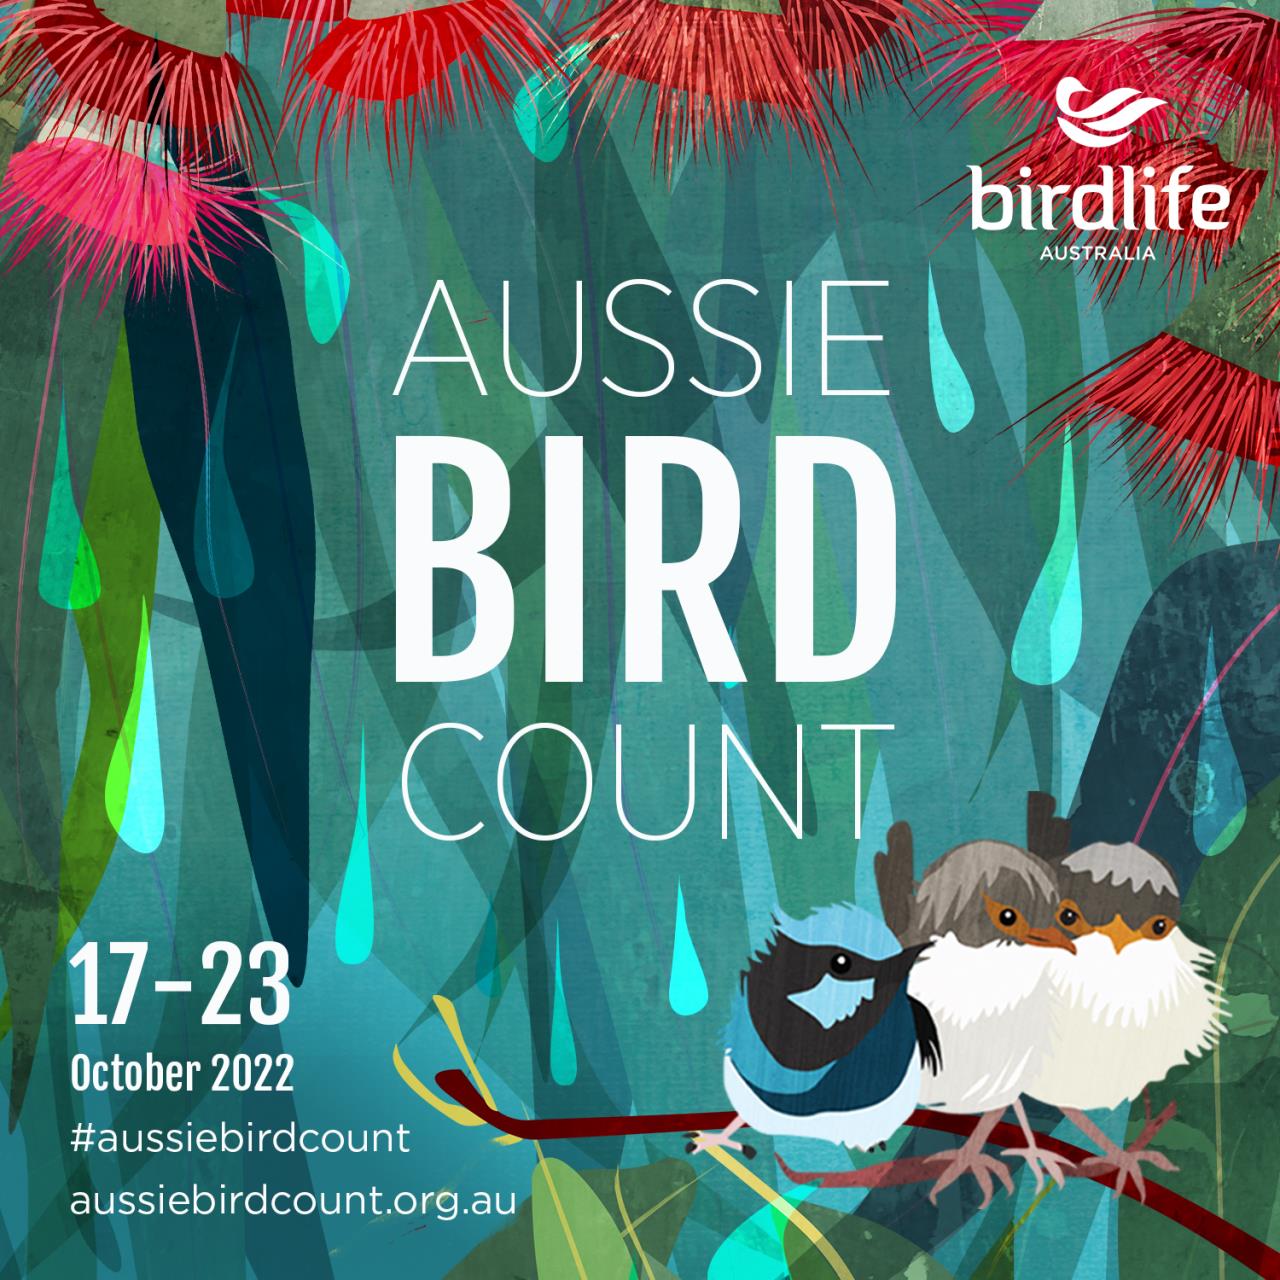 Join the Shire in the 2022 Aussie Bird Count